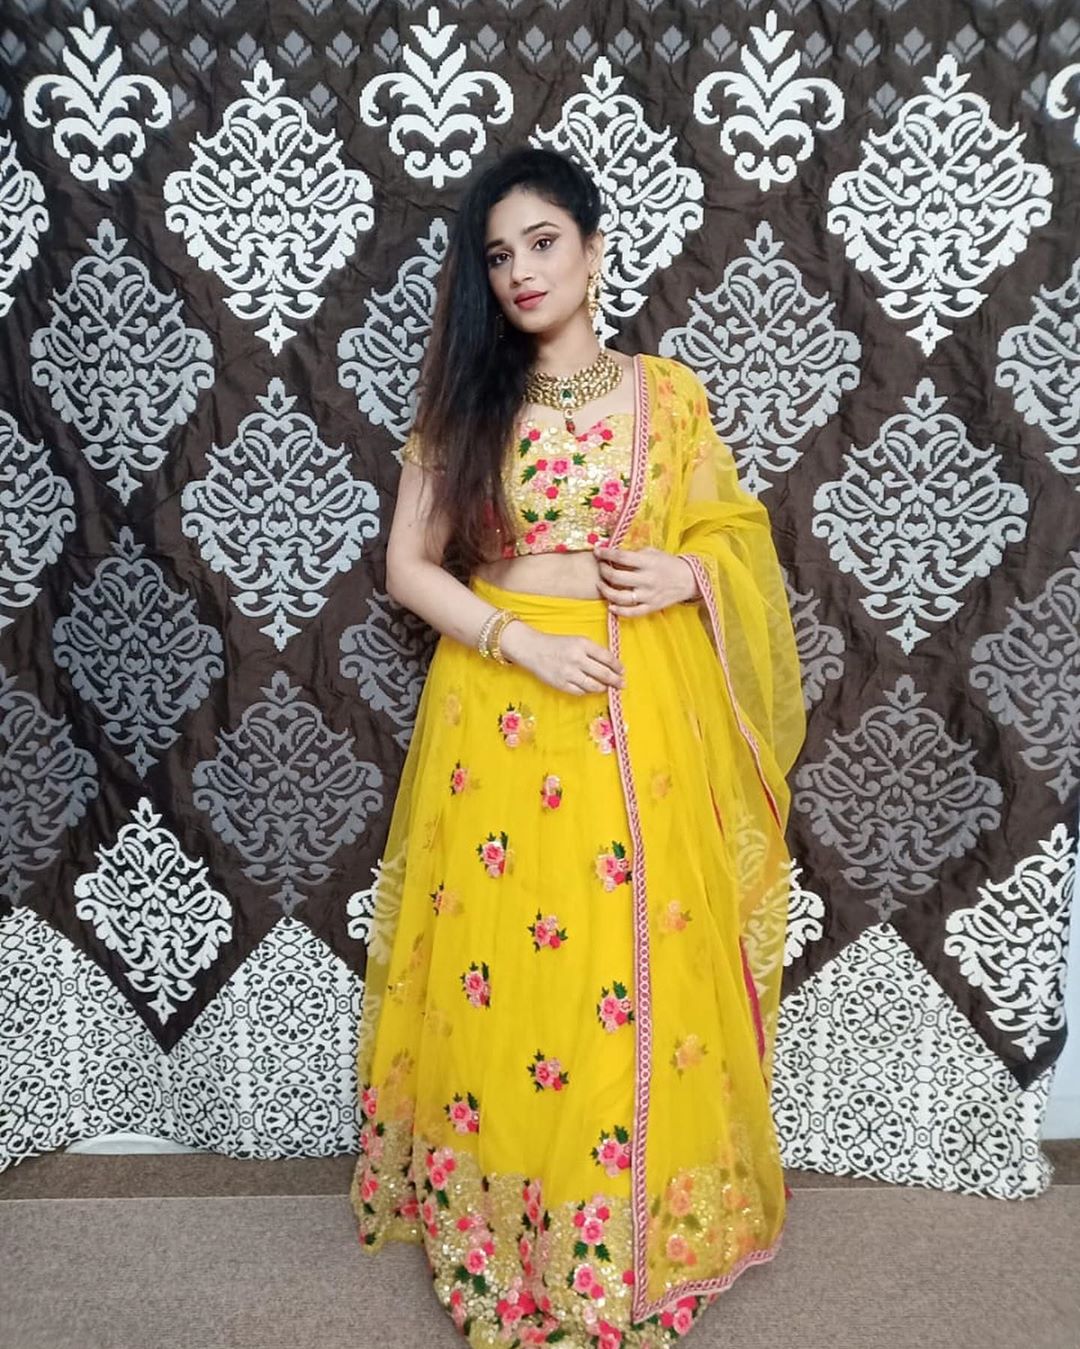 Mirraw - @cosmolifestyler looks fantastic in the yellow embroidered net lehenga.She looks stunning when paired with the gold kundan jewellery.
Check out the amazing lehenga collection on @mirraw.
Prod...